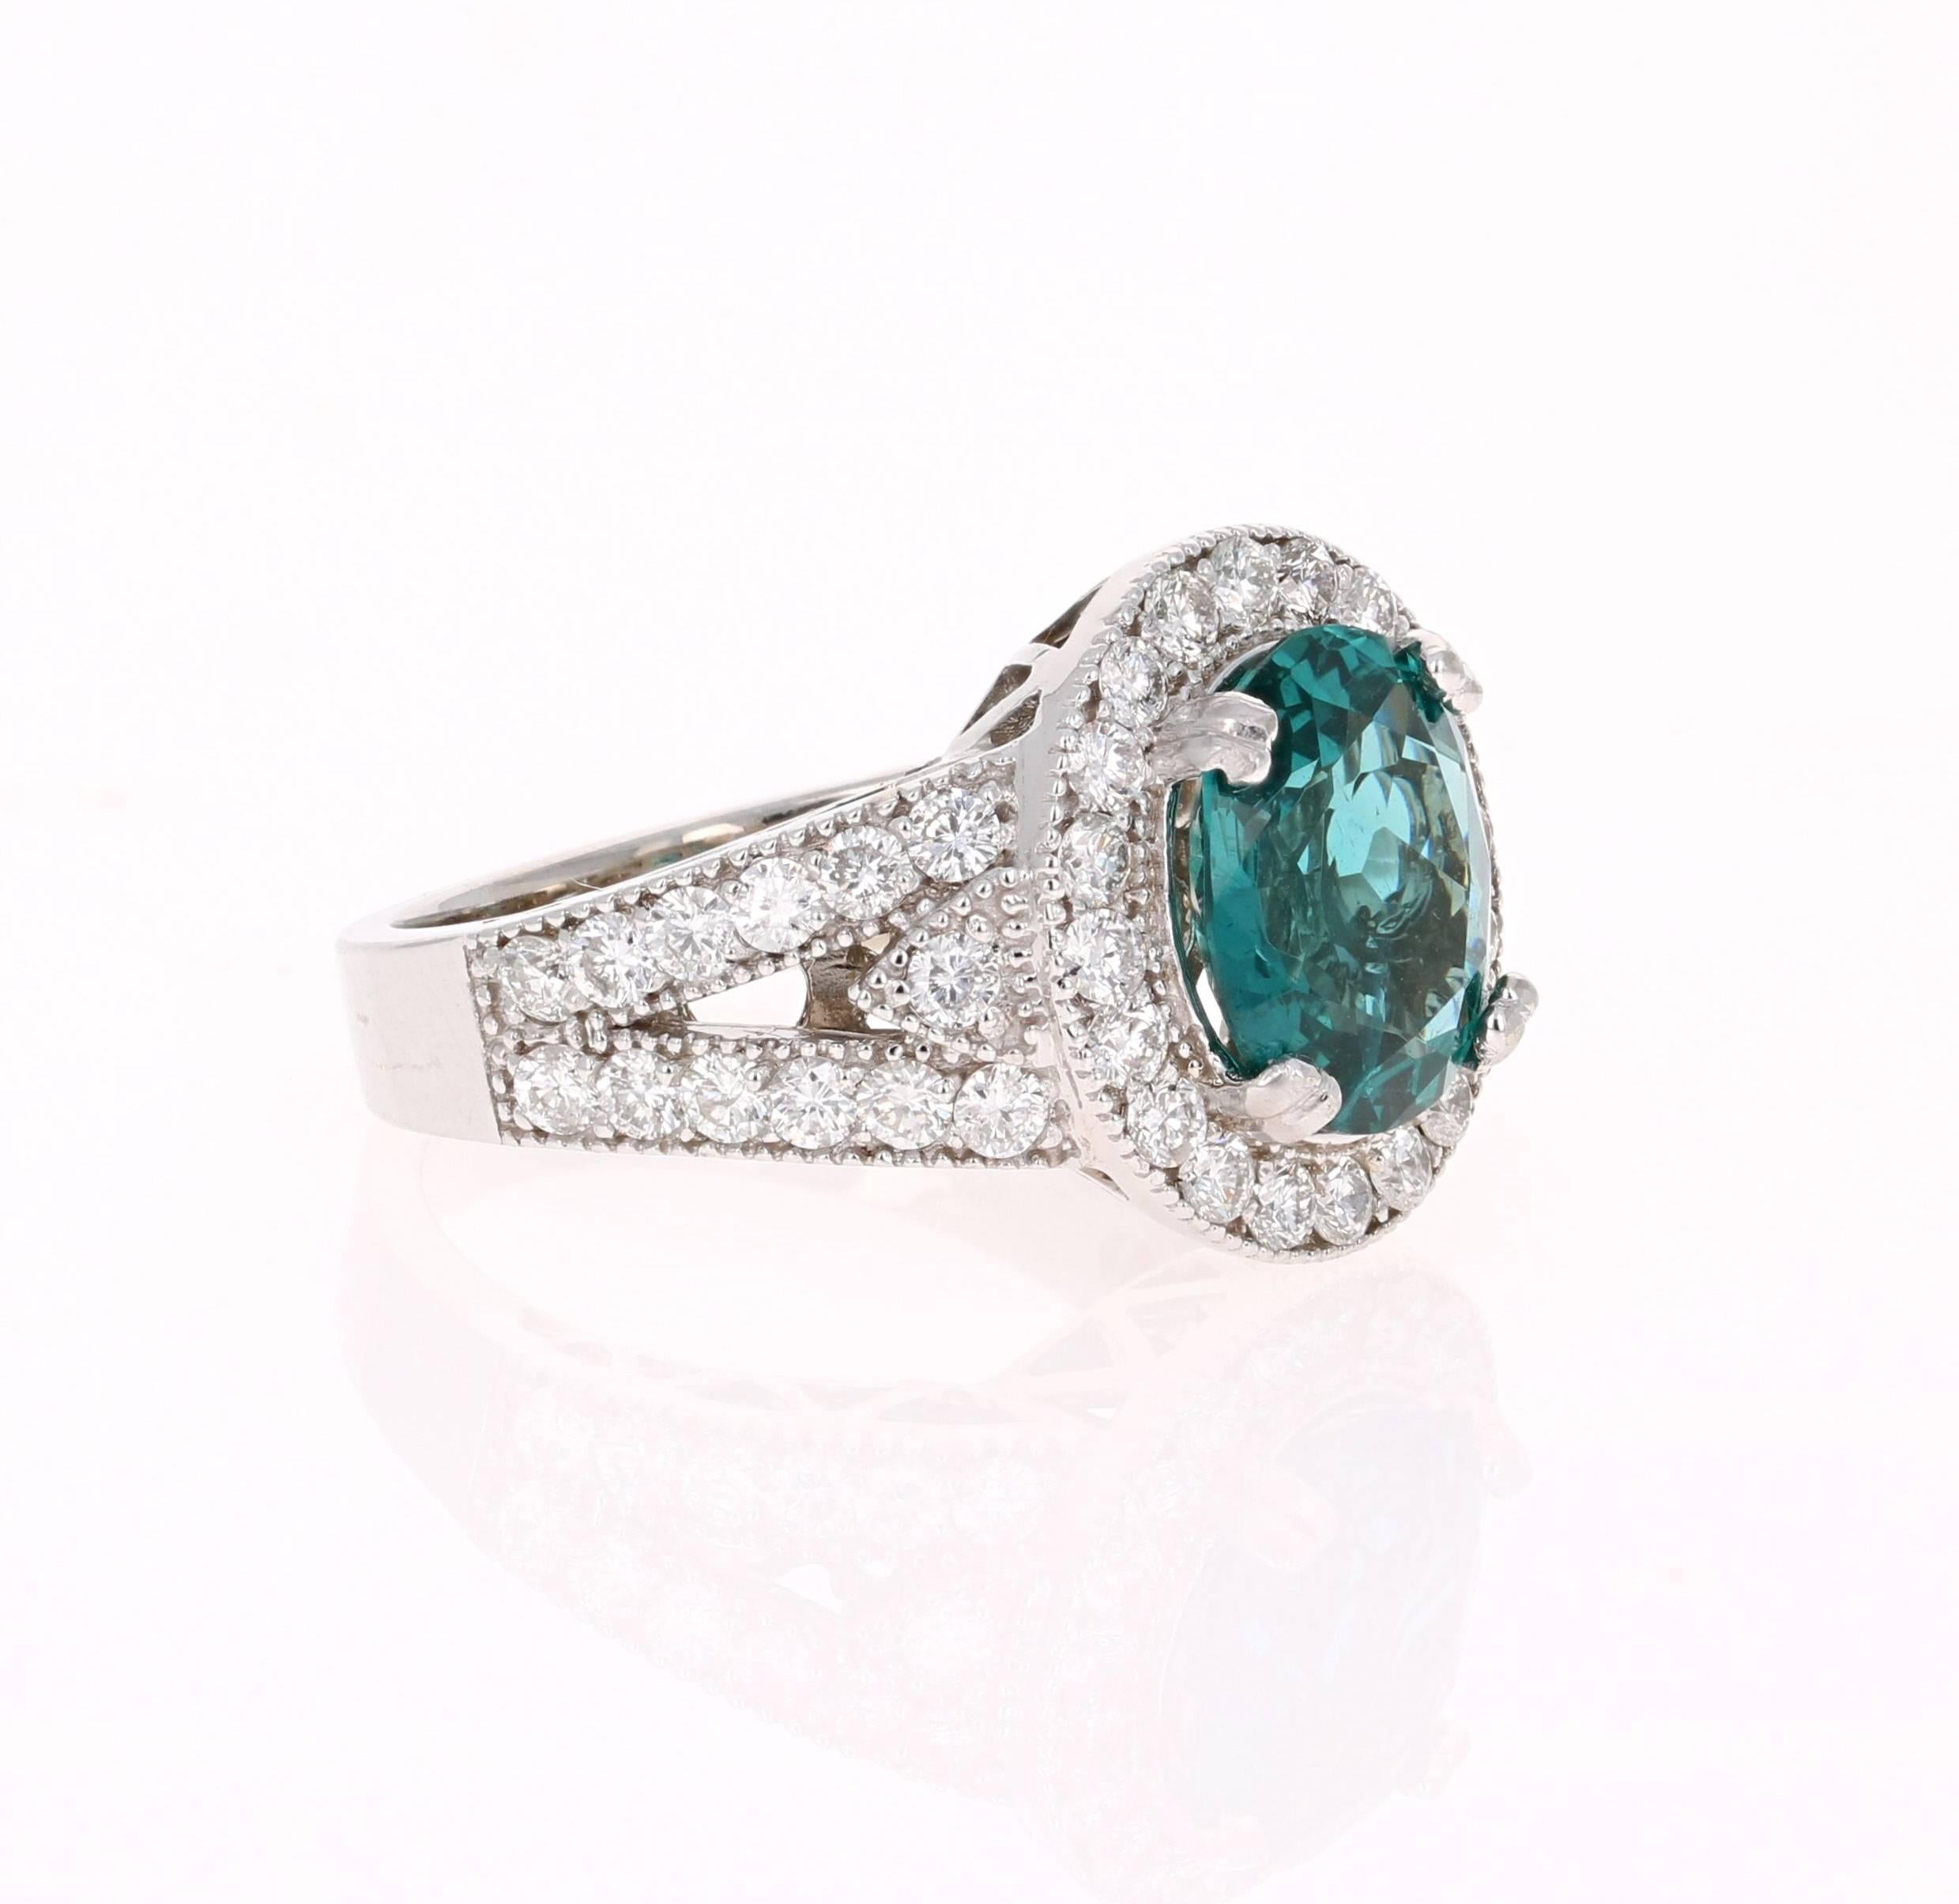 Stunning 4.47 Carat Apatite Diamond White Gold Cocktail Ring that is sure to elevate your accessory collection!

The ring has a 3.05 Carat Oval Cut Apatite set in the center of the ring surrounded by 48 Round Cut Diamonds that weigh 1.42 carats. The